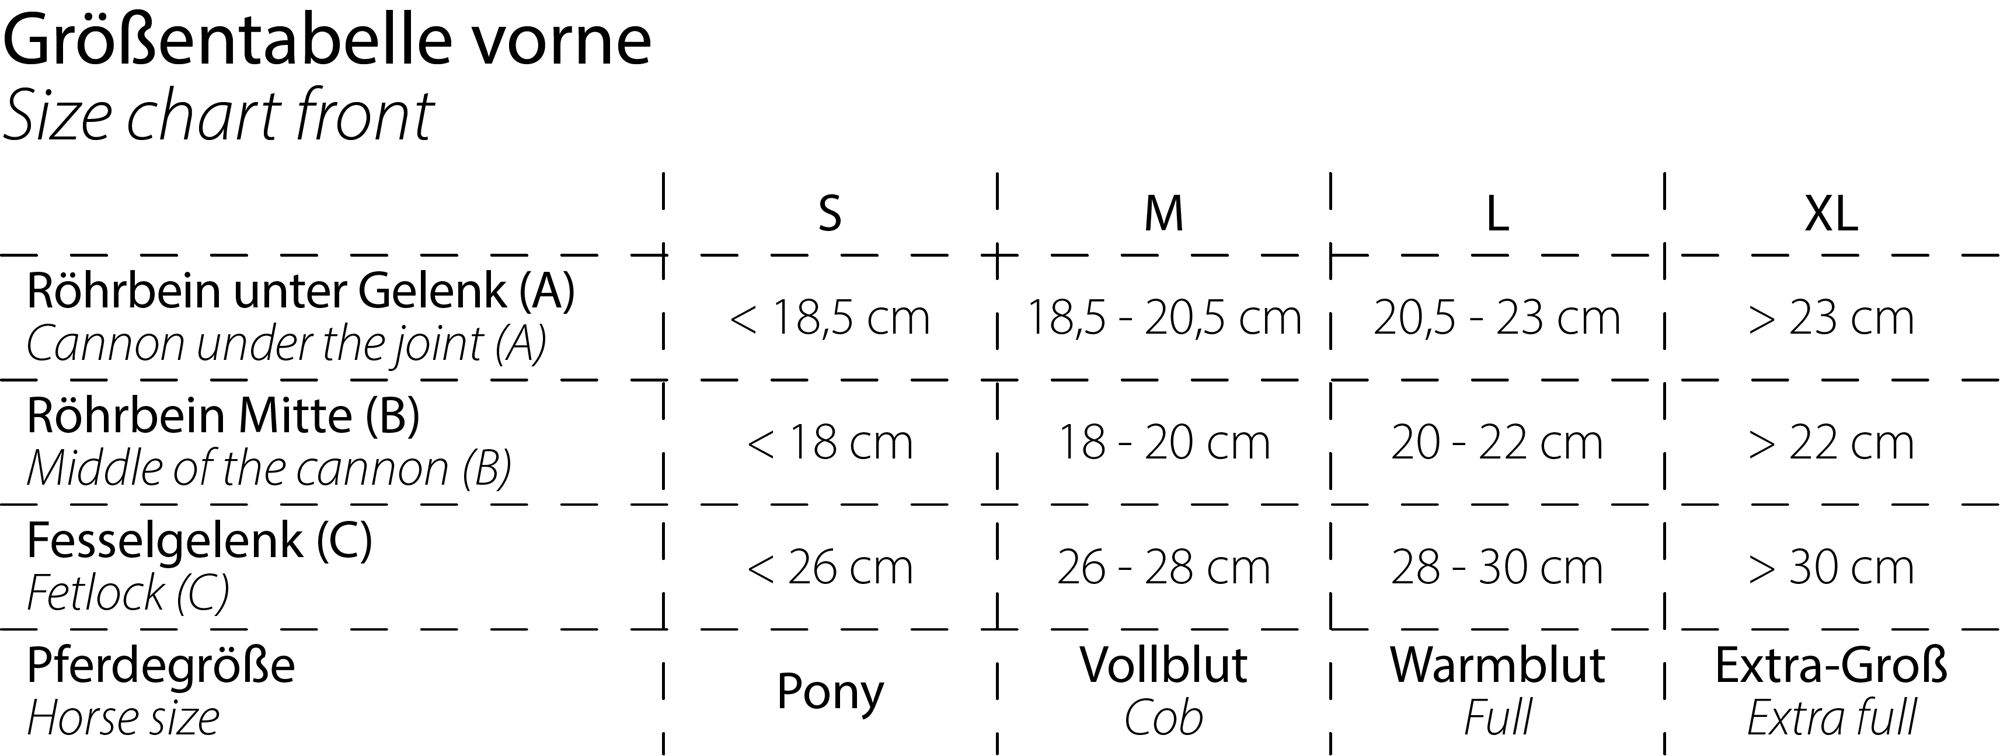 Size chart front